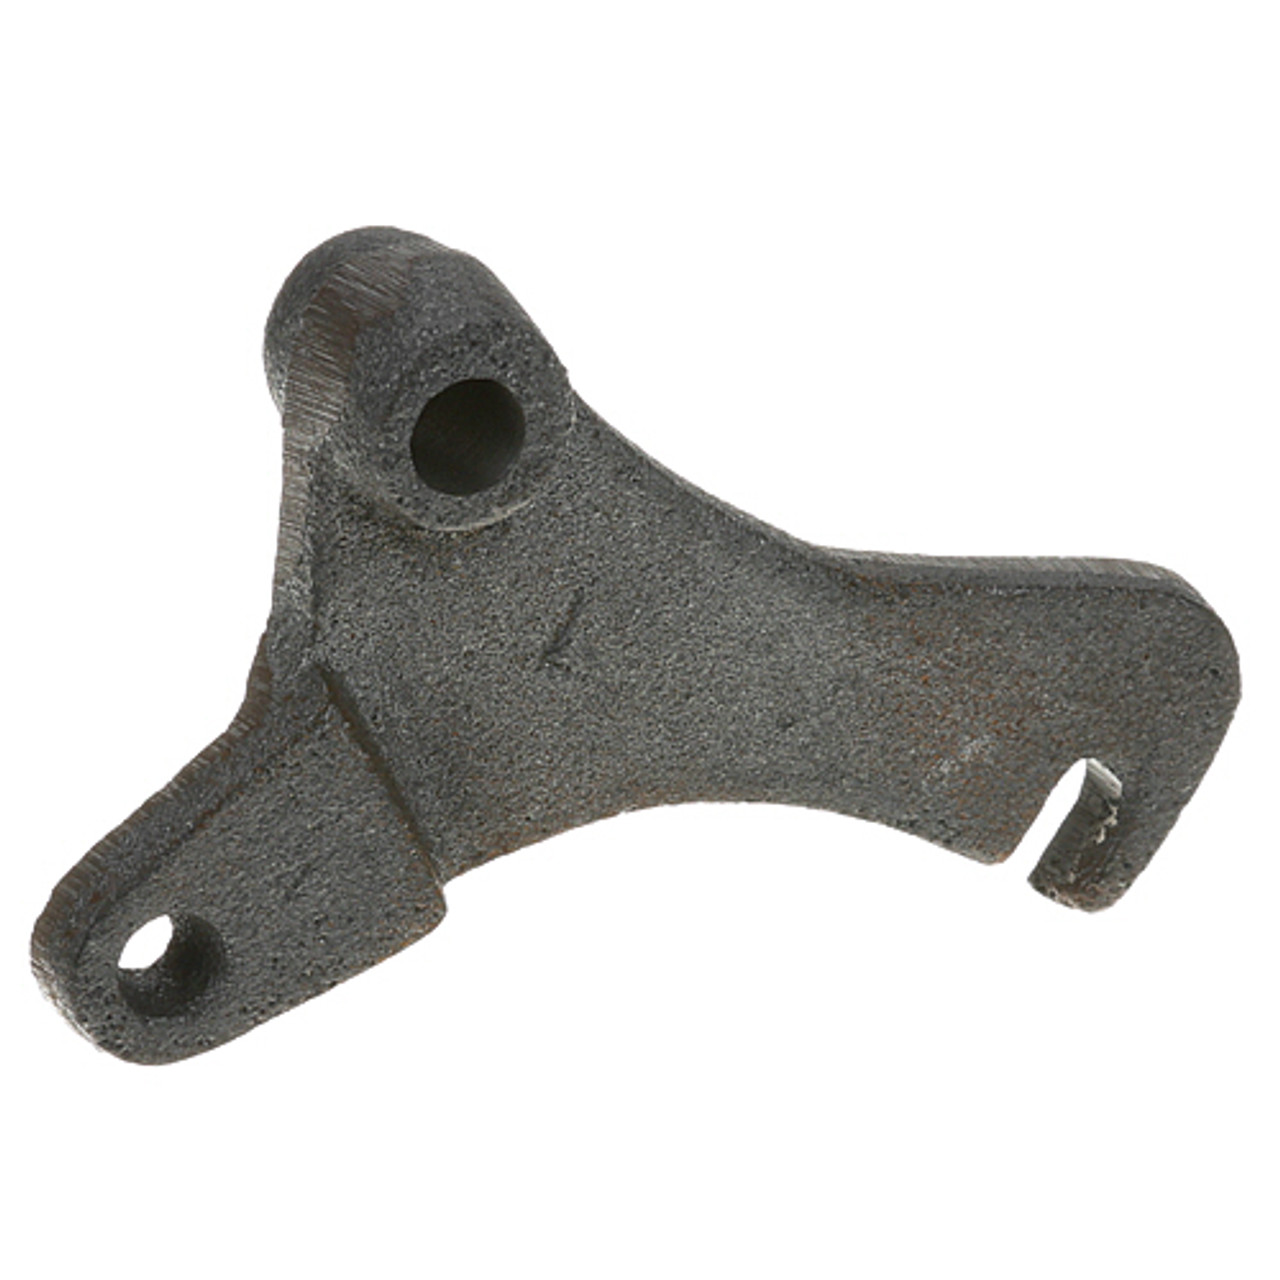 L H Rocker Arm - Replacement Part For Hobart 00-719710